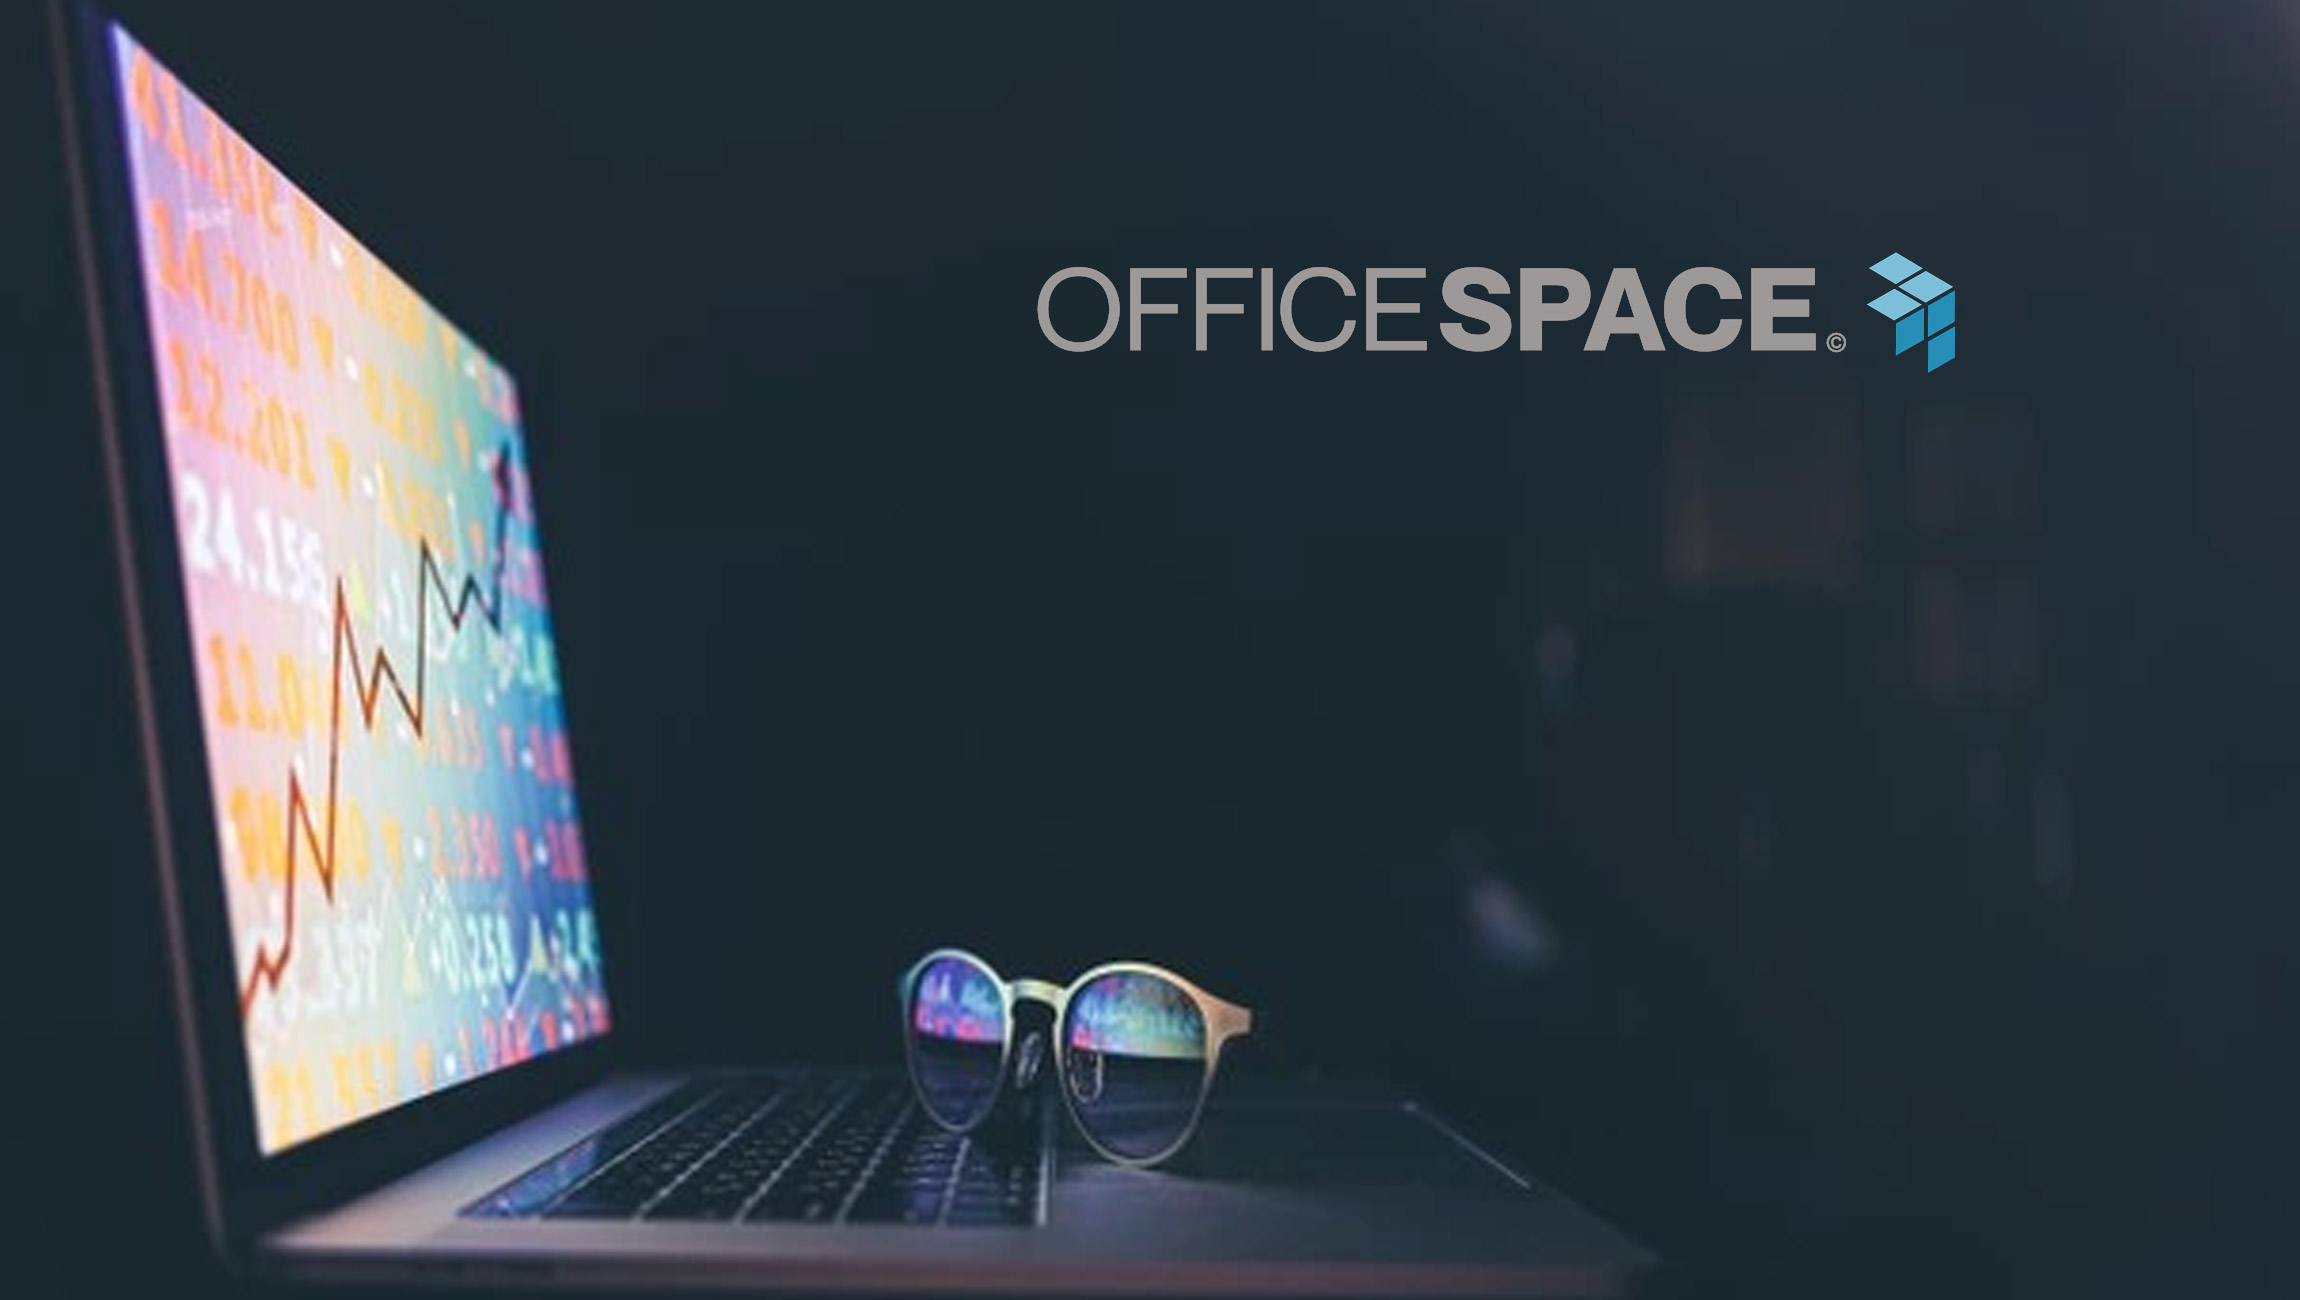 OfficeSpace-Software-Receives-_150-Million-Strategic-Investment-From-Vista-Equity-Partners-to-Power-the-Future-of-Hybrid-Work